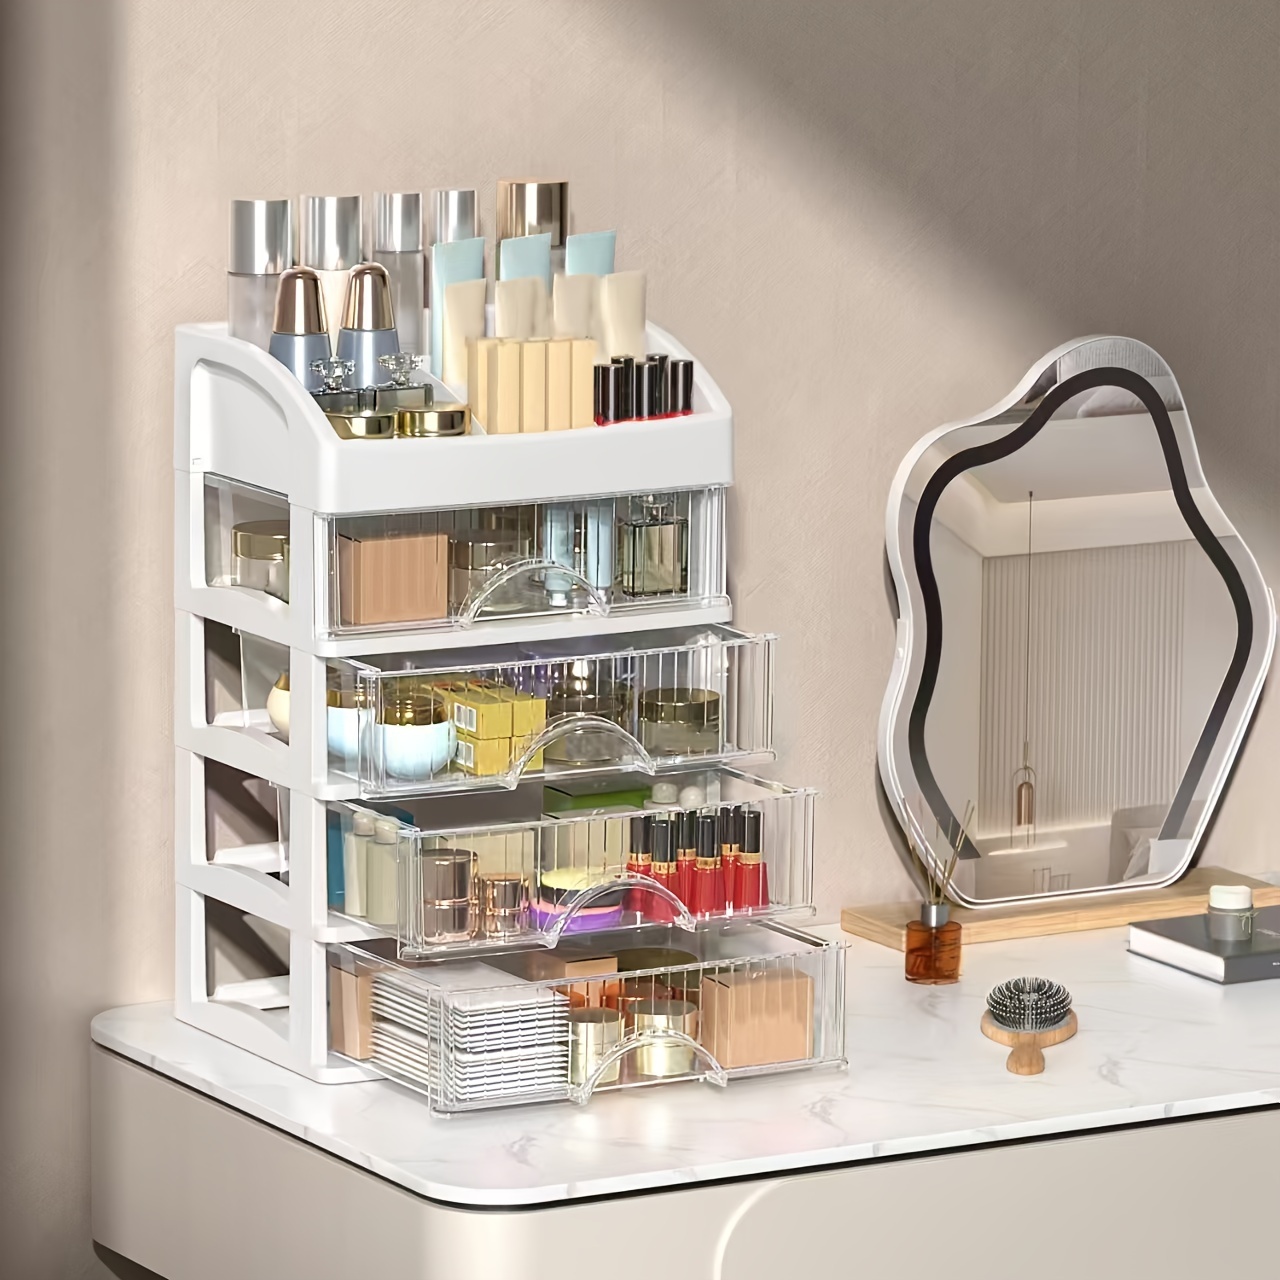 

Makeup Organizer For Vanity, Large Capacity Desk Storage Box With Drawer For Dresser, Bathroom & Countertop, Great Holder For Cosmetics, Perfume, Skincare & Toiletries